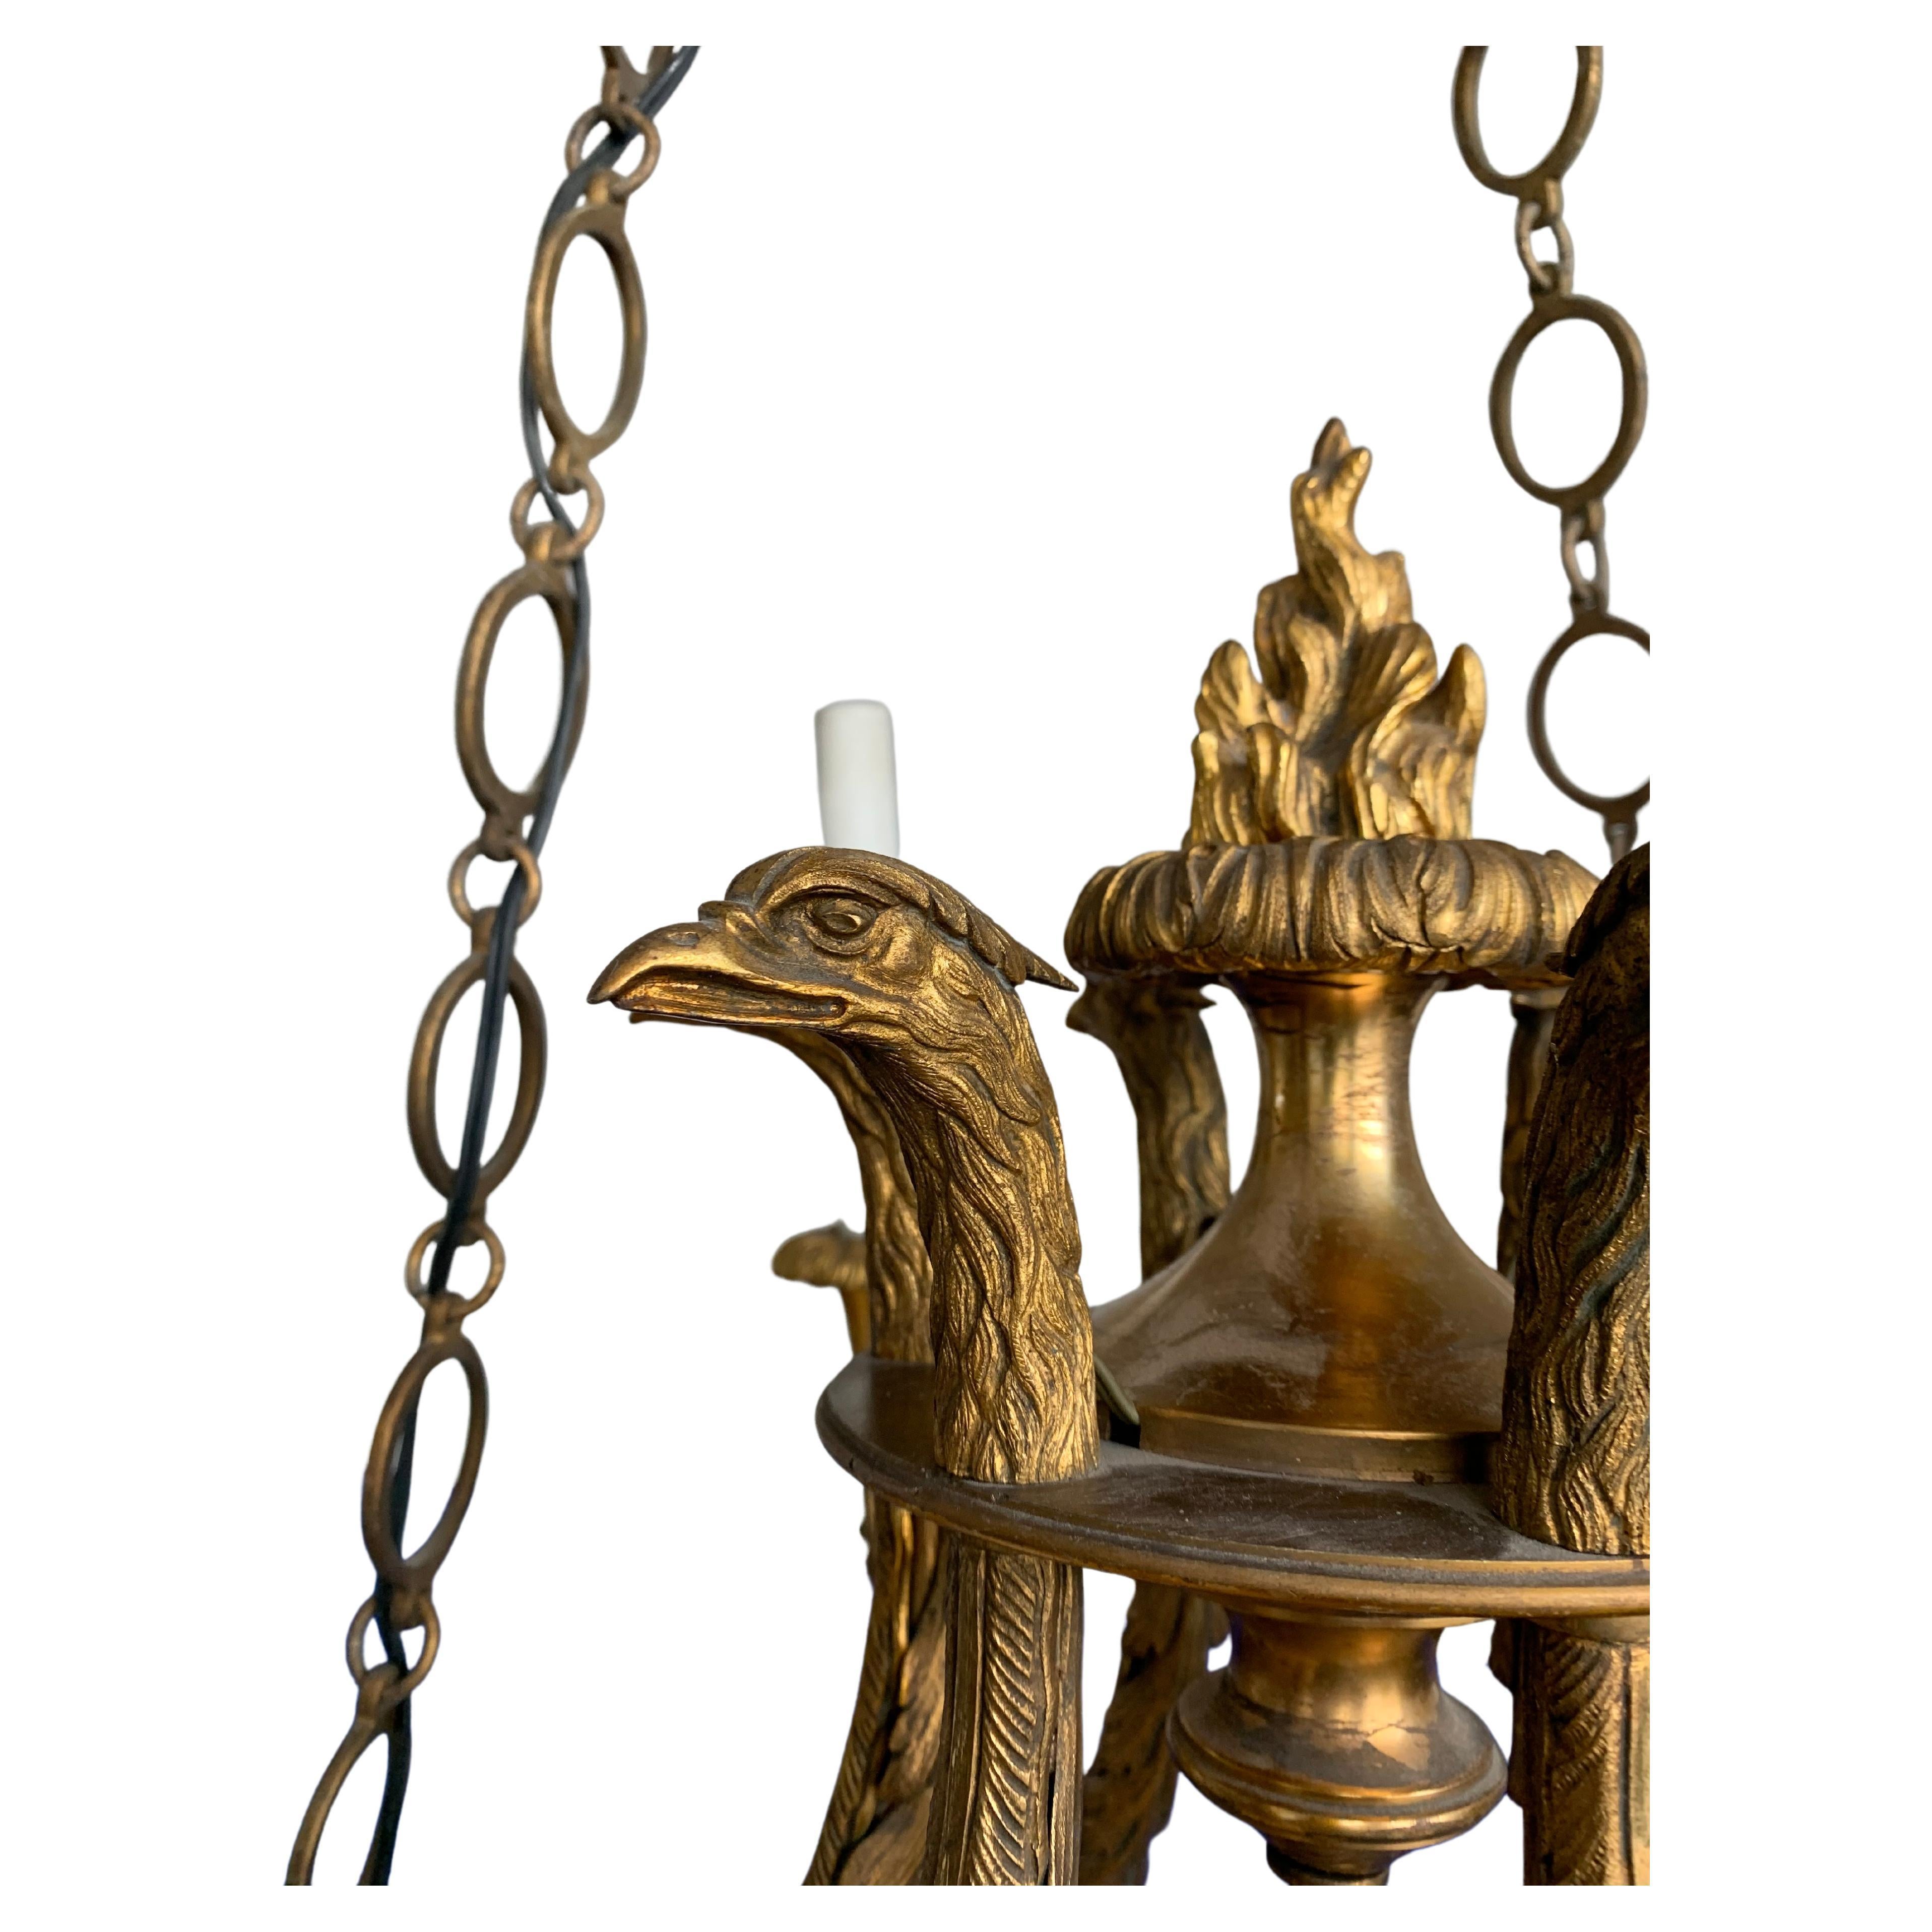 Stunning six-light chandelier with eternal flames urrounded by gilt bronze Eagle head sculptures. 

This unique chandelier is a truly stylish, well proportioned and top quality made work of lighting art from the turn of the century. If you have an